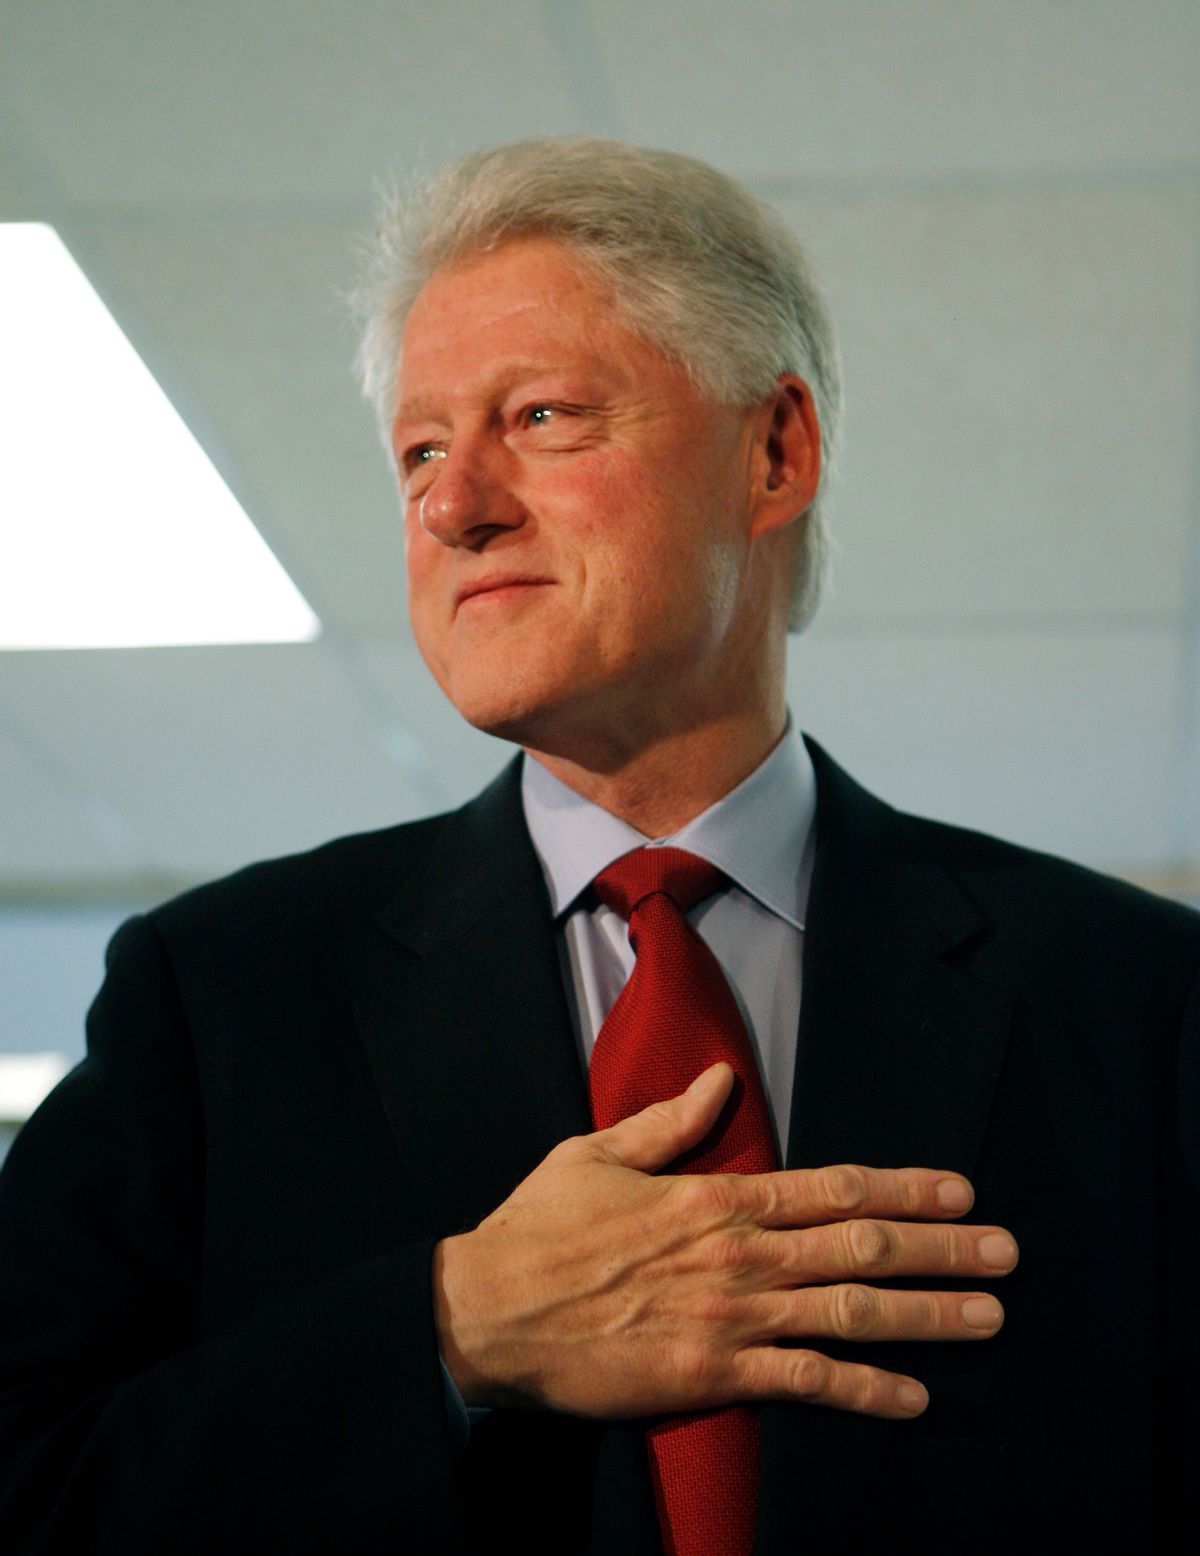 Former U.S. President Bill Clinton holds his hand over his heart as he speaks to reporters after voting for his wife, Democratic presidential candidate U.S. Senator Hillary Clinton (D-NY) in the U.S. presidential primary election at the Douglas Grafflin Elementary School near the Clinton's home in Chappaqua, New York, February 5, 2008.    REUTERS/Mike Segar    (UNITED STATES) US PRESIDENTIAL ELECTION CAMPAIGN 2008      (Â© Mike Segar / Reuters)